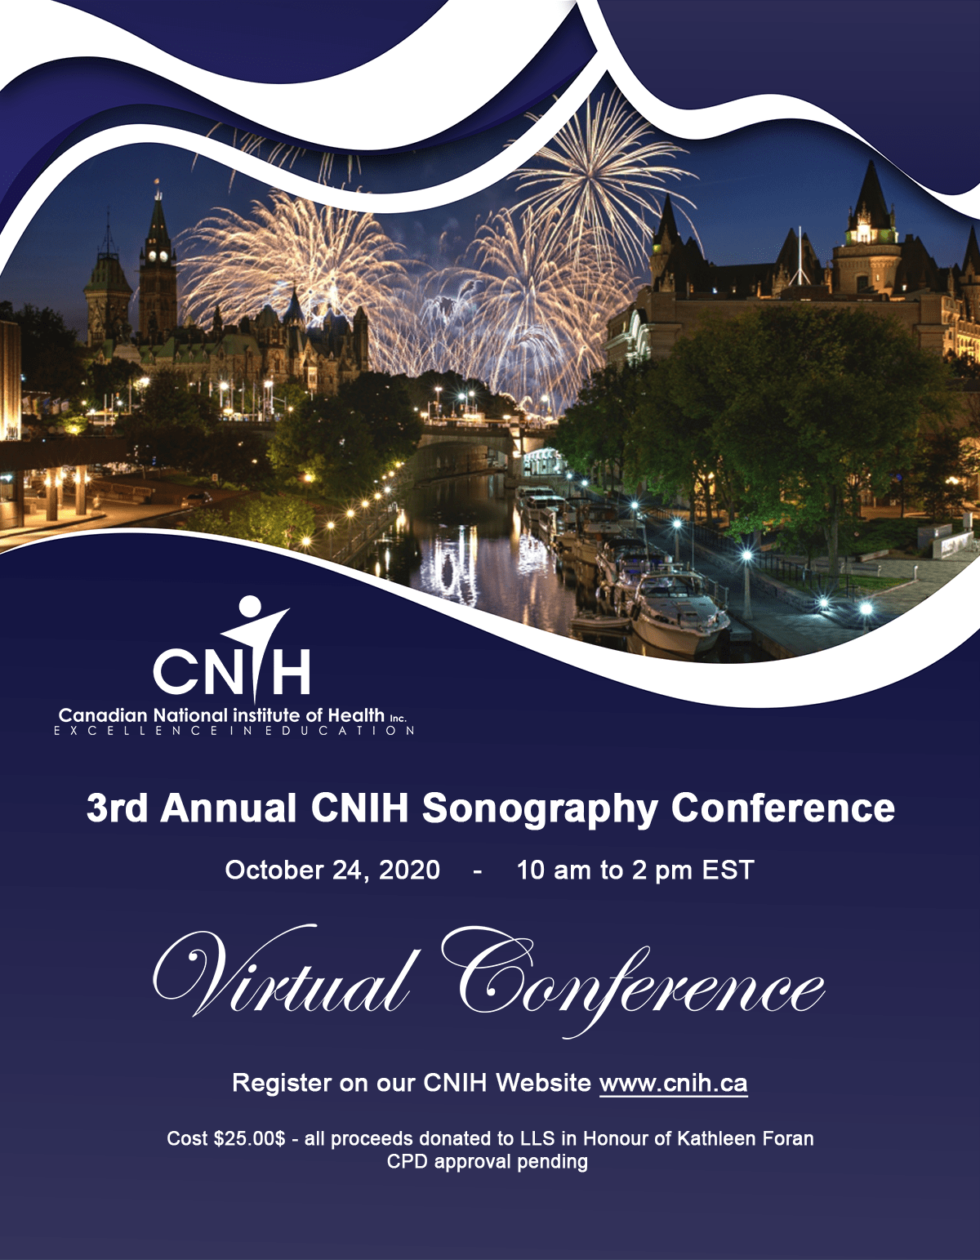 Sonography conference Canadian National Institute of Health